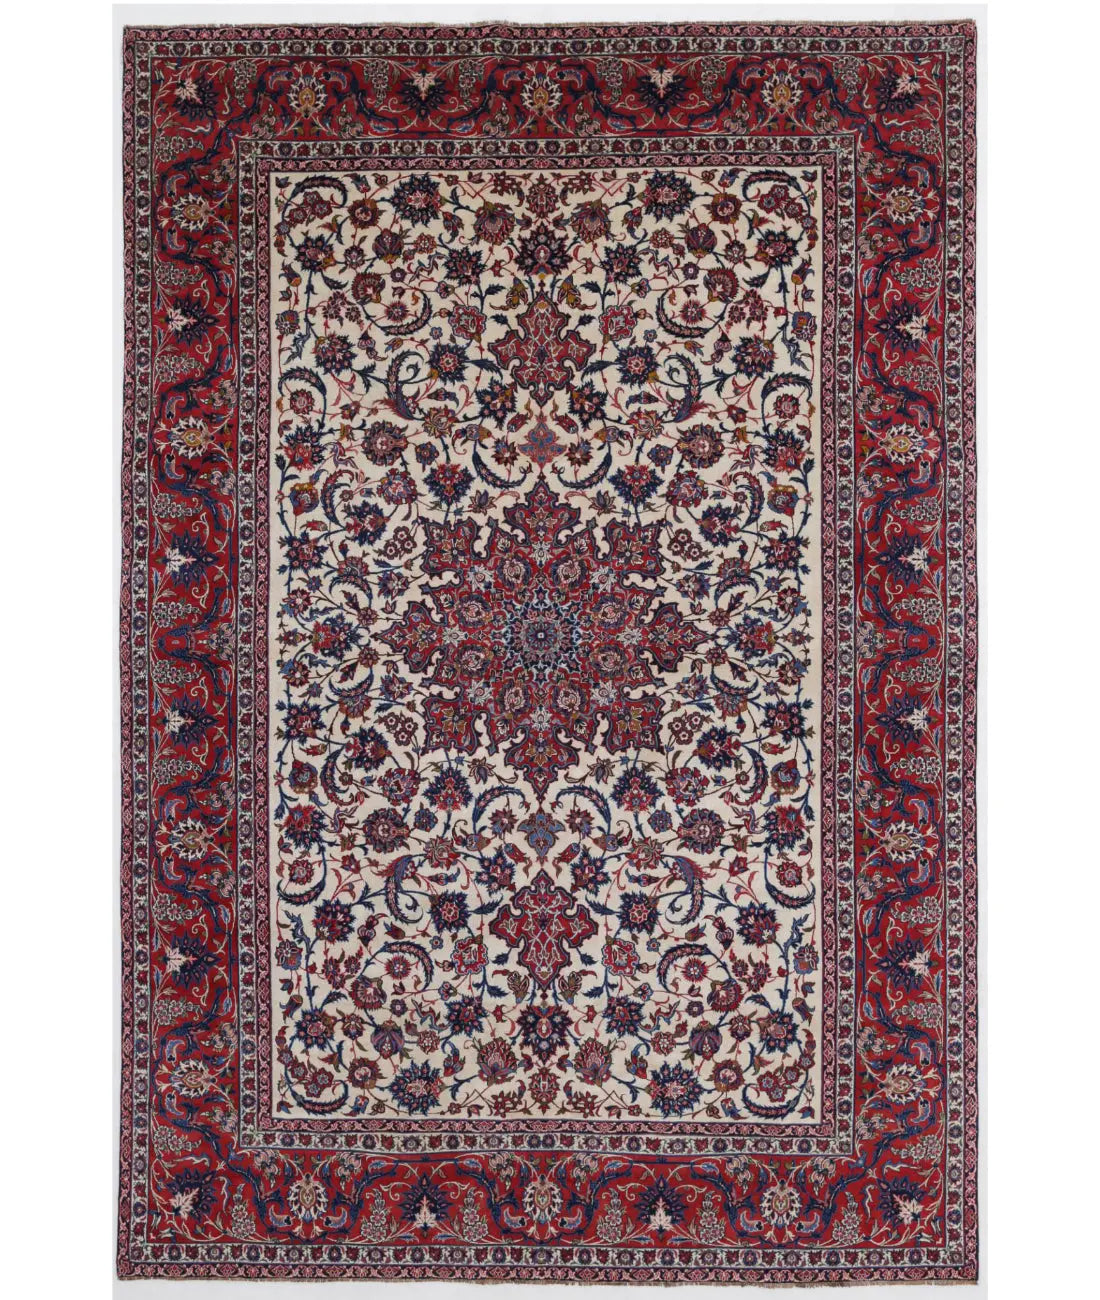 Hand Knotted Antique Masterpiece Persian Isfahan Wool Rug - 7&#39;4&#39;&#39; x 11&#39;1&#39;&#39; - Arteverk Rugs Area rug